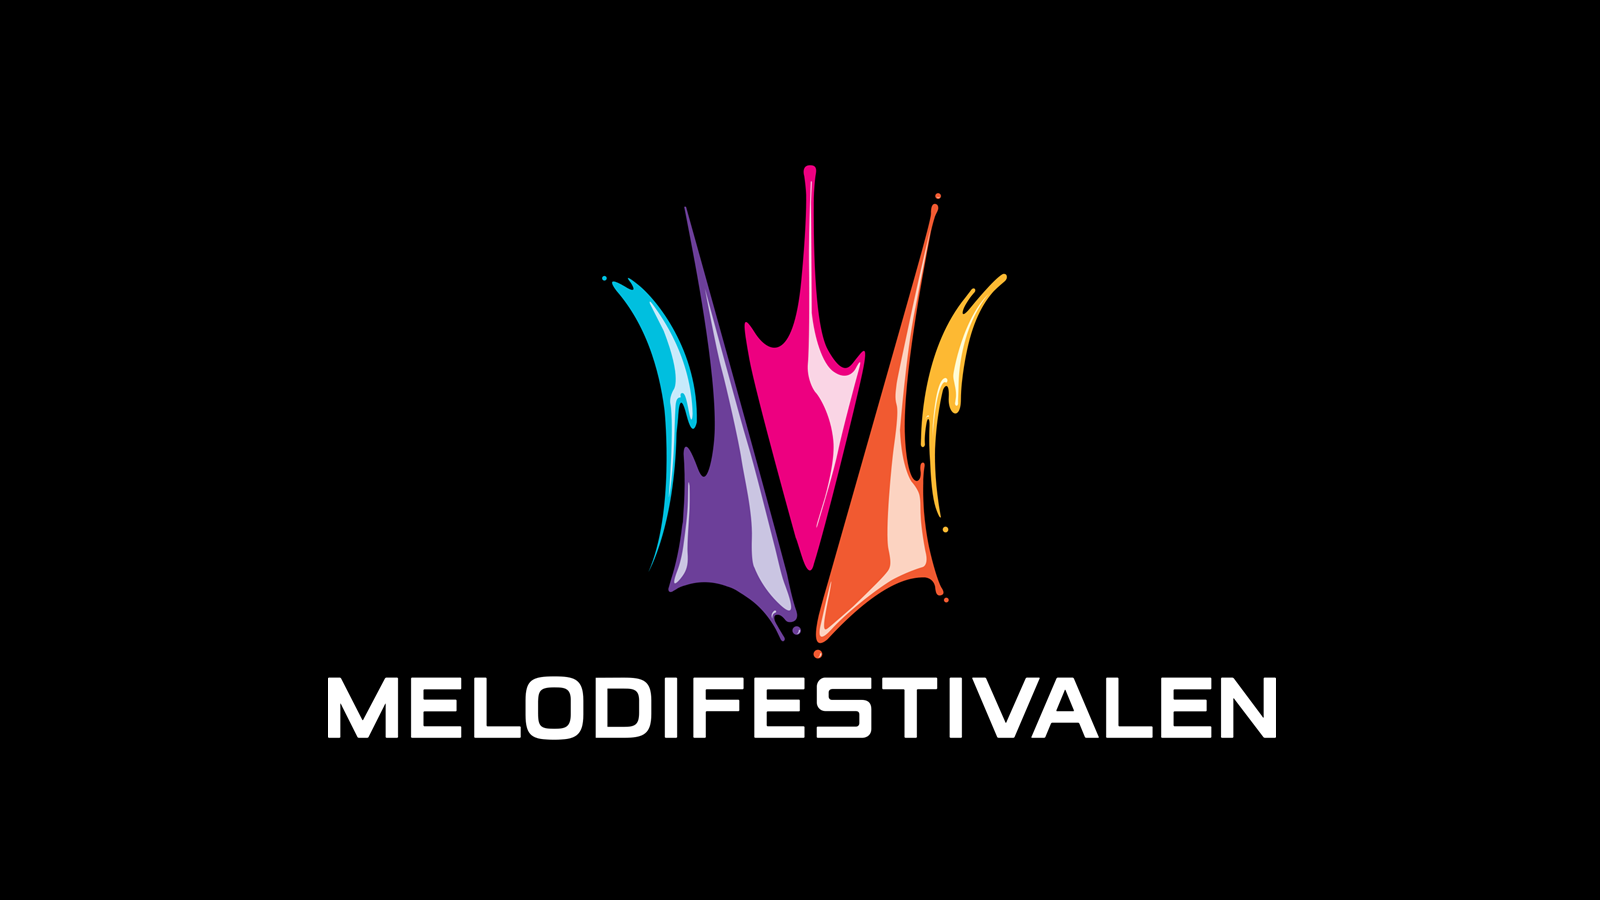 Melodifestivalen 2015: Sweden names artists for first and second semi-finals